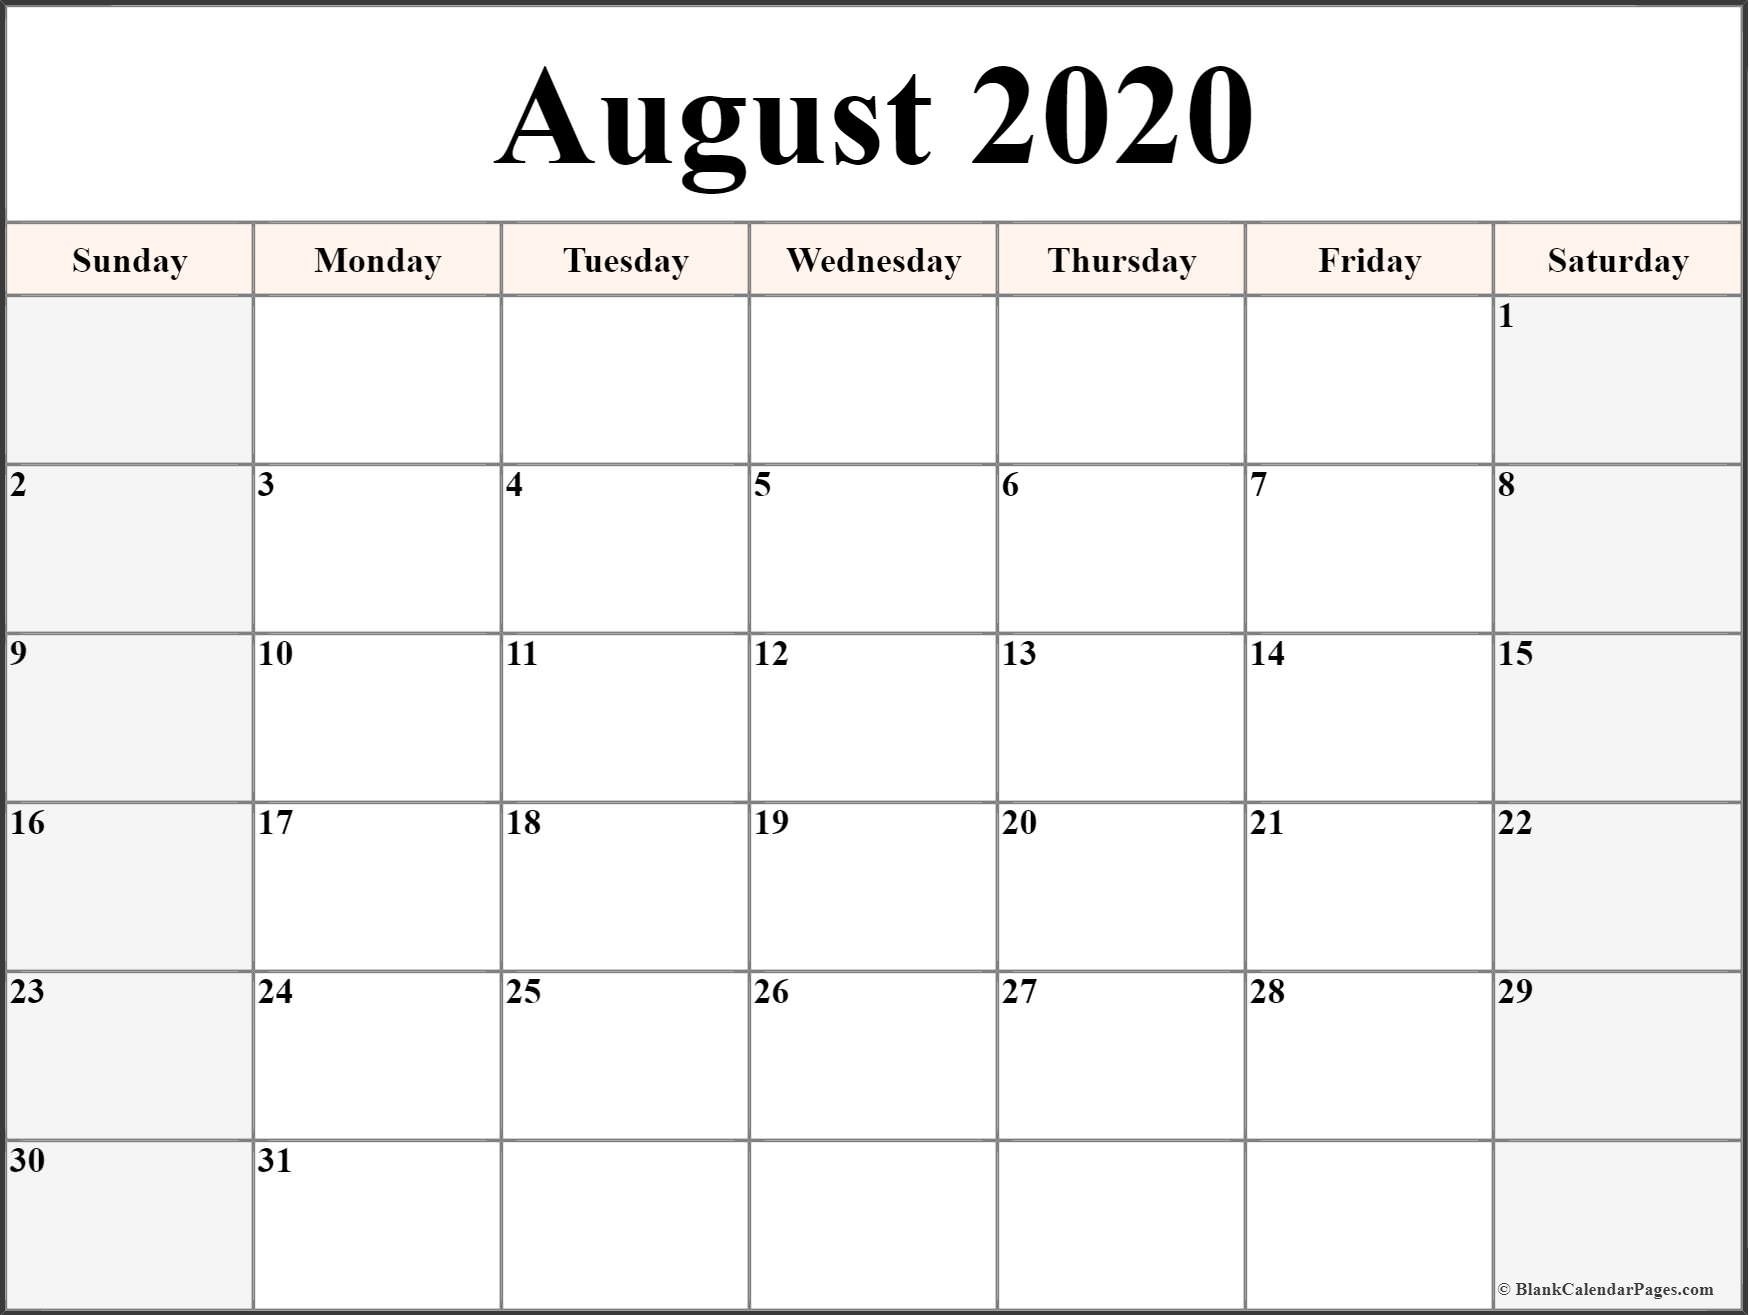 August 2020 Calendar | Free Printable Monthly Calendars-Printable Blank Monthly Calendar 2020 August